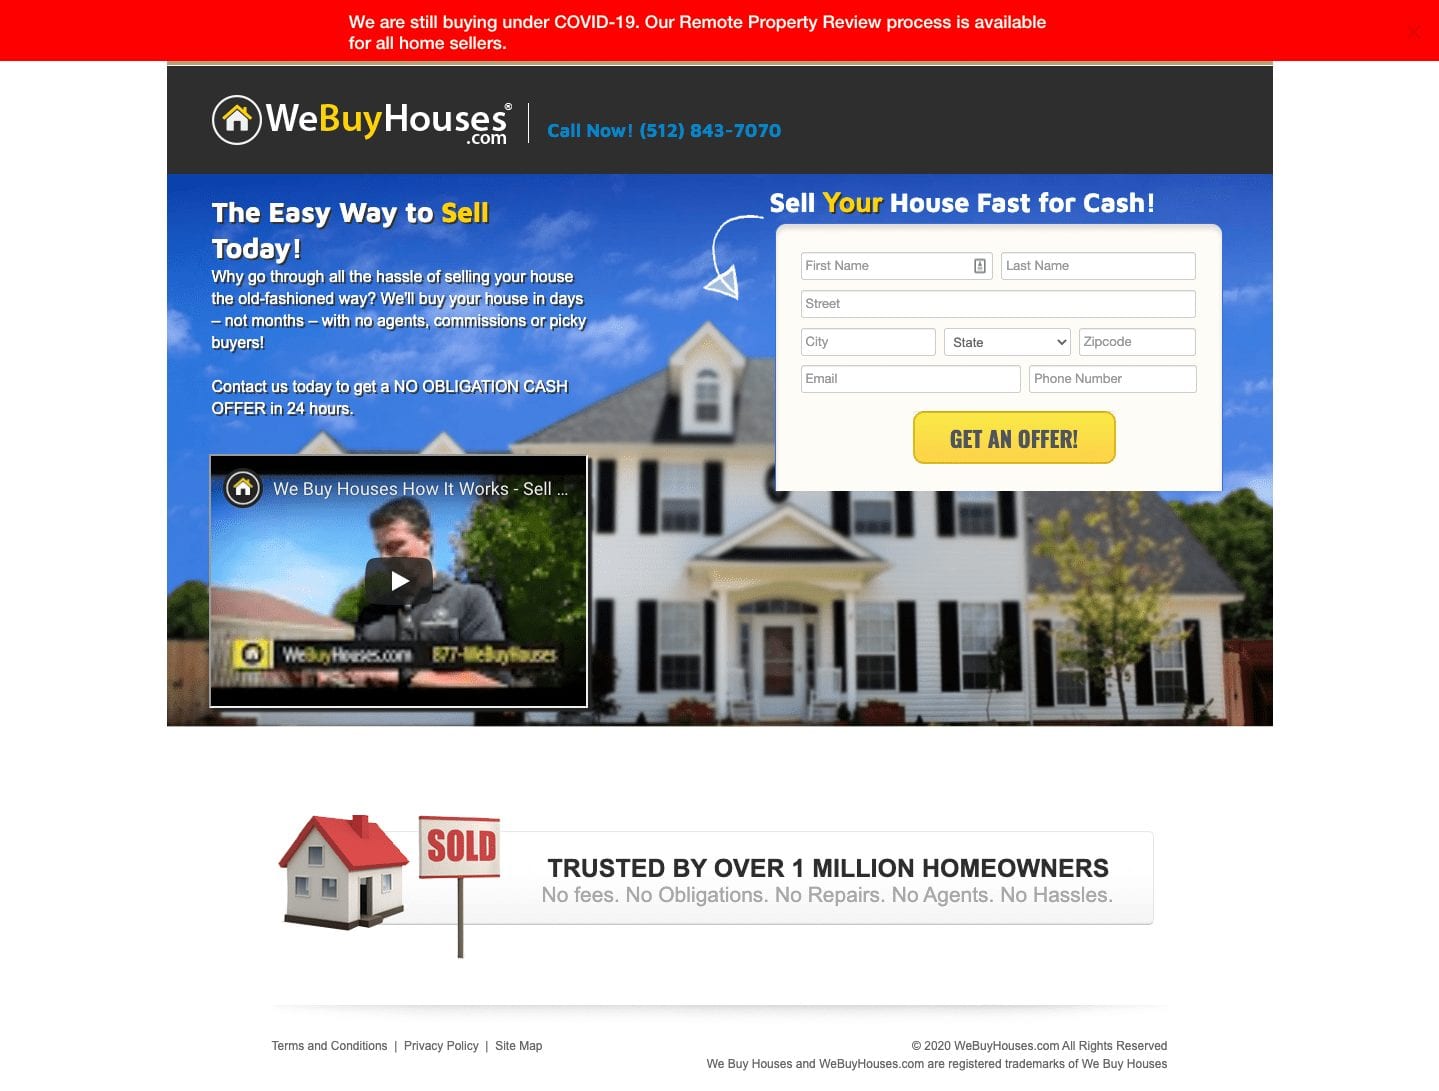 great landing page for real estate agents